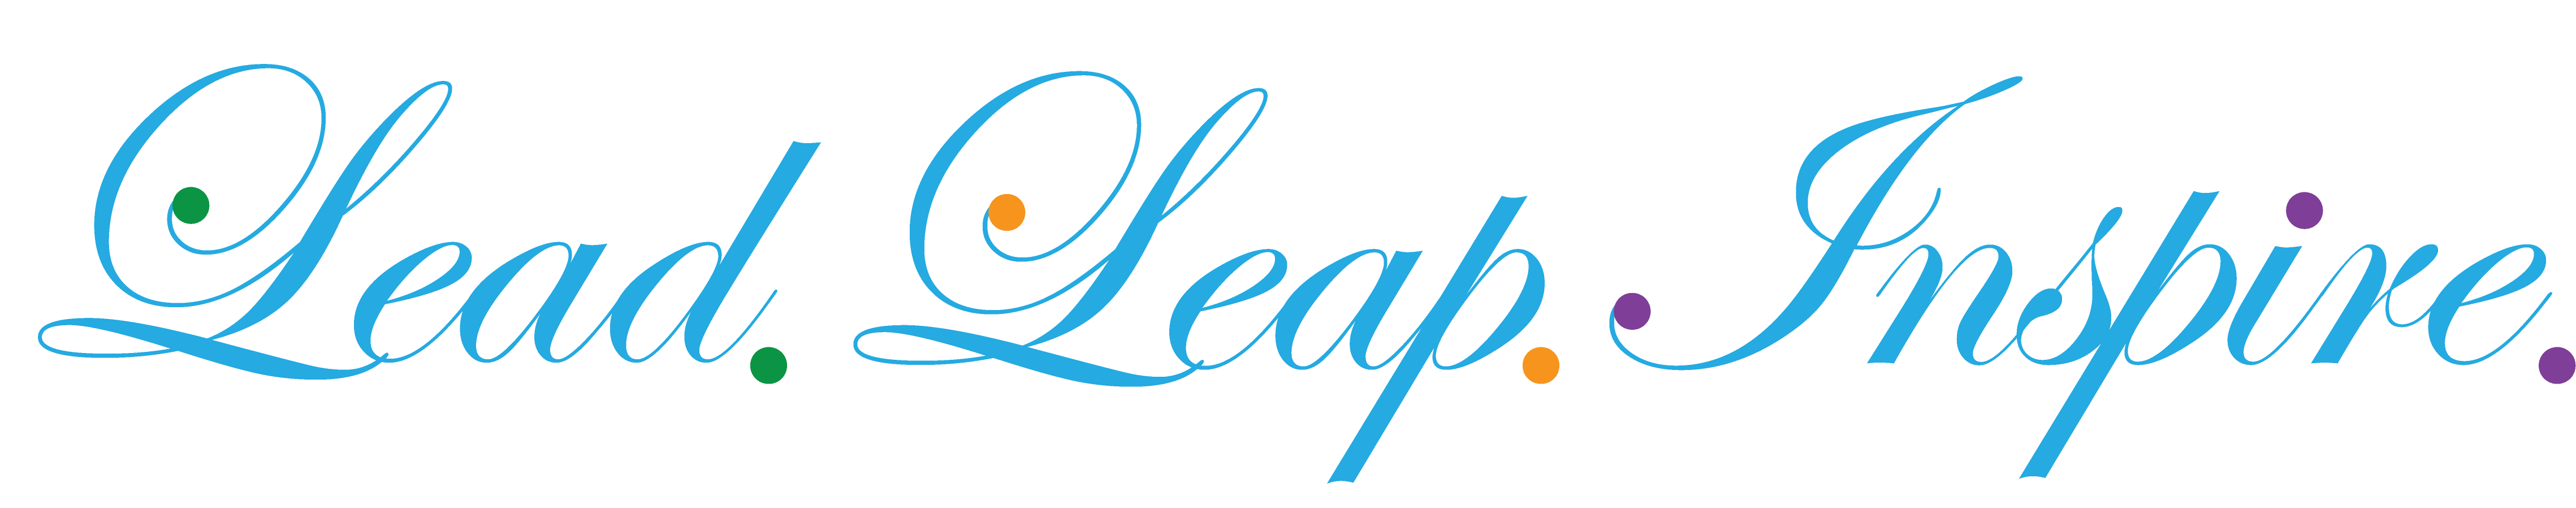 Lead_Leap_Inspire_periods